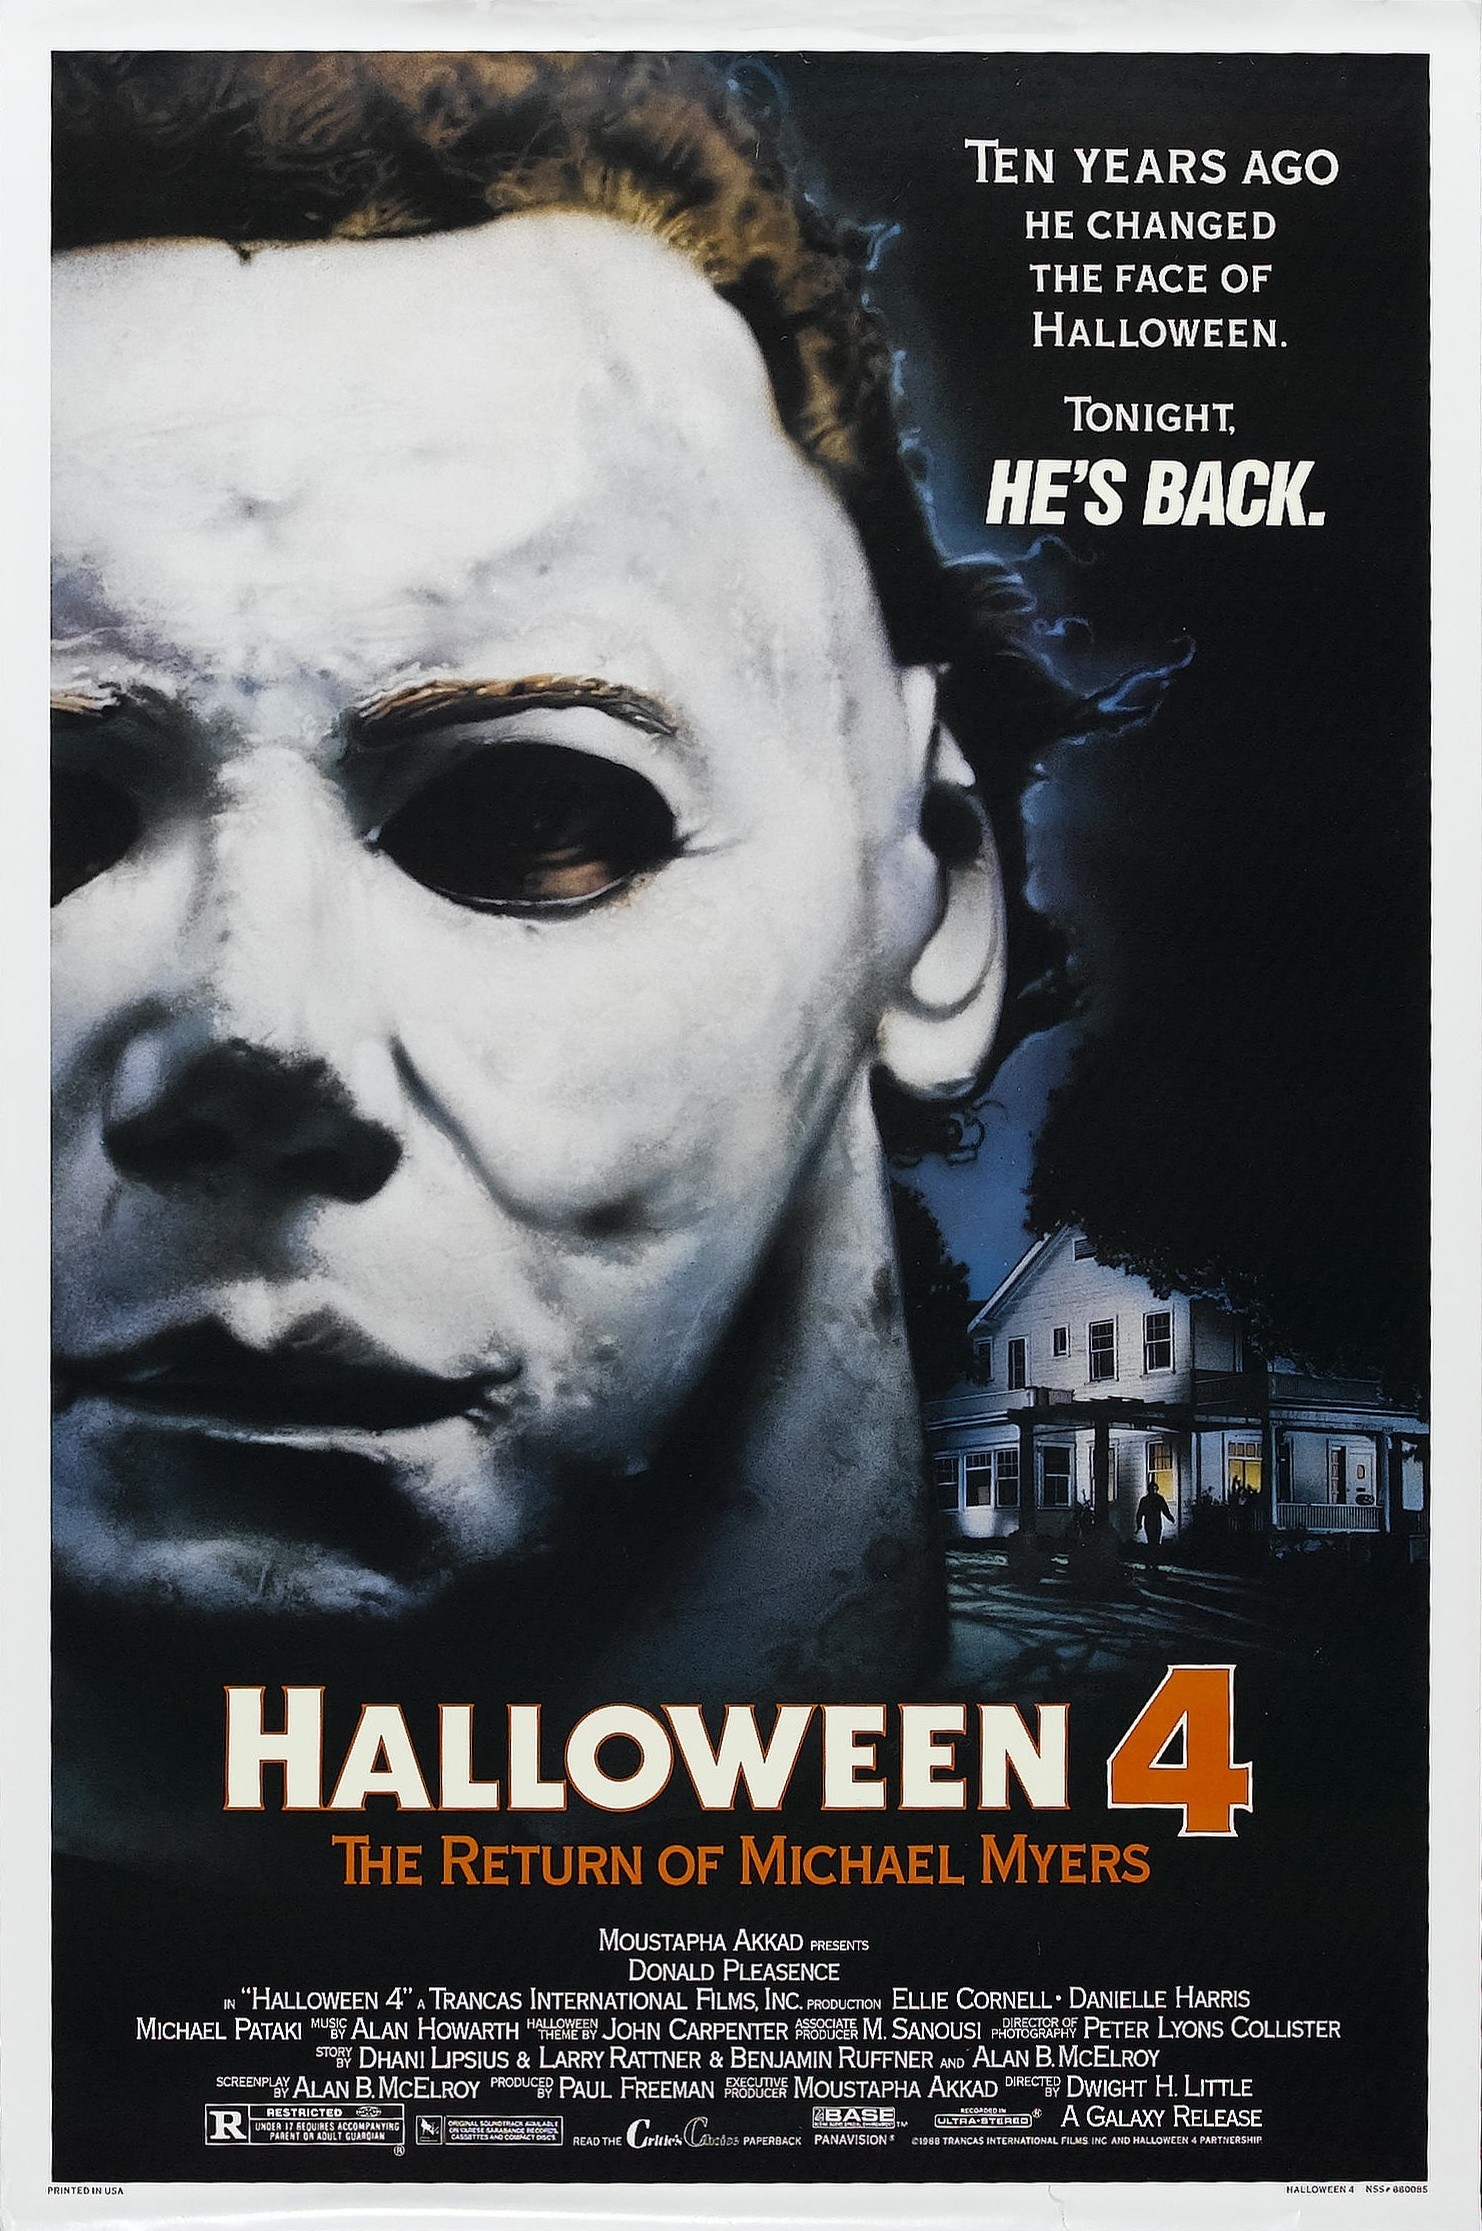 Halloween 4 The Return of Michael Myers Is an Undervalued Sequel Halloween 4 The Return Of Michael Myers Is An Undervalued Sequel